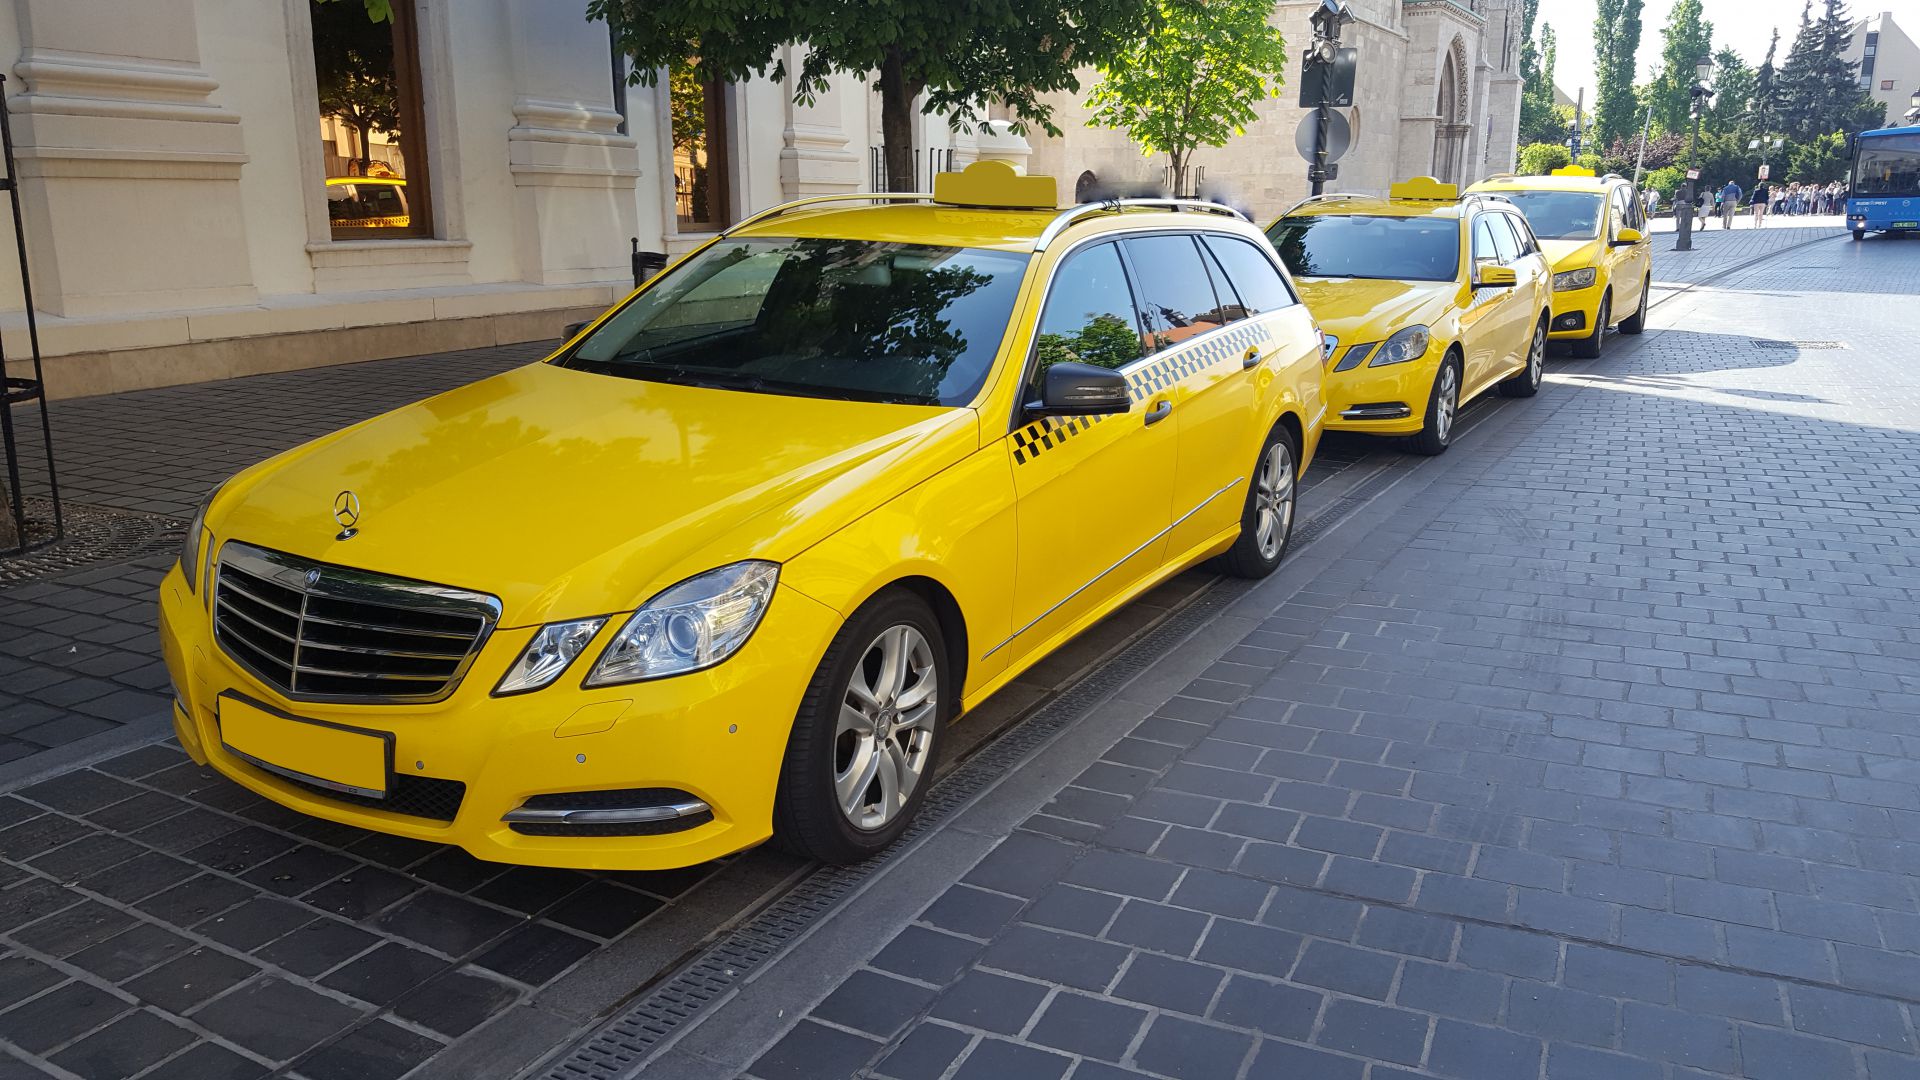 TaxiCab Services